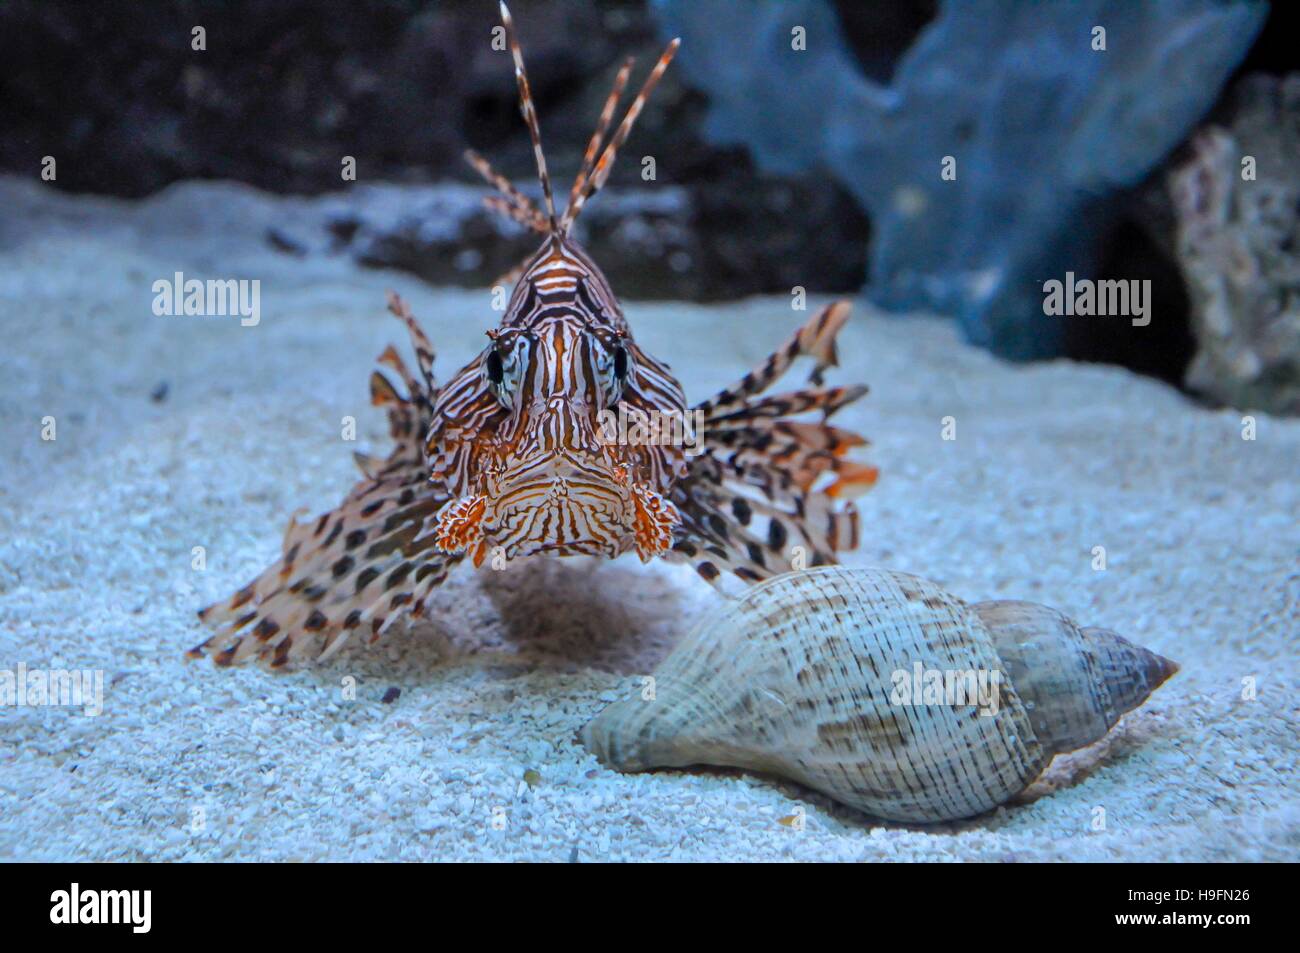 Lion fish looking at my camera during my vacation in Florida, USA. Stock Photo